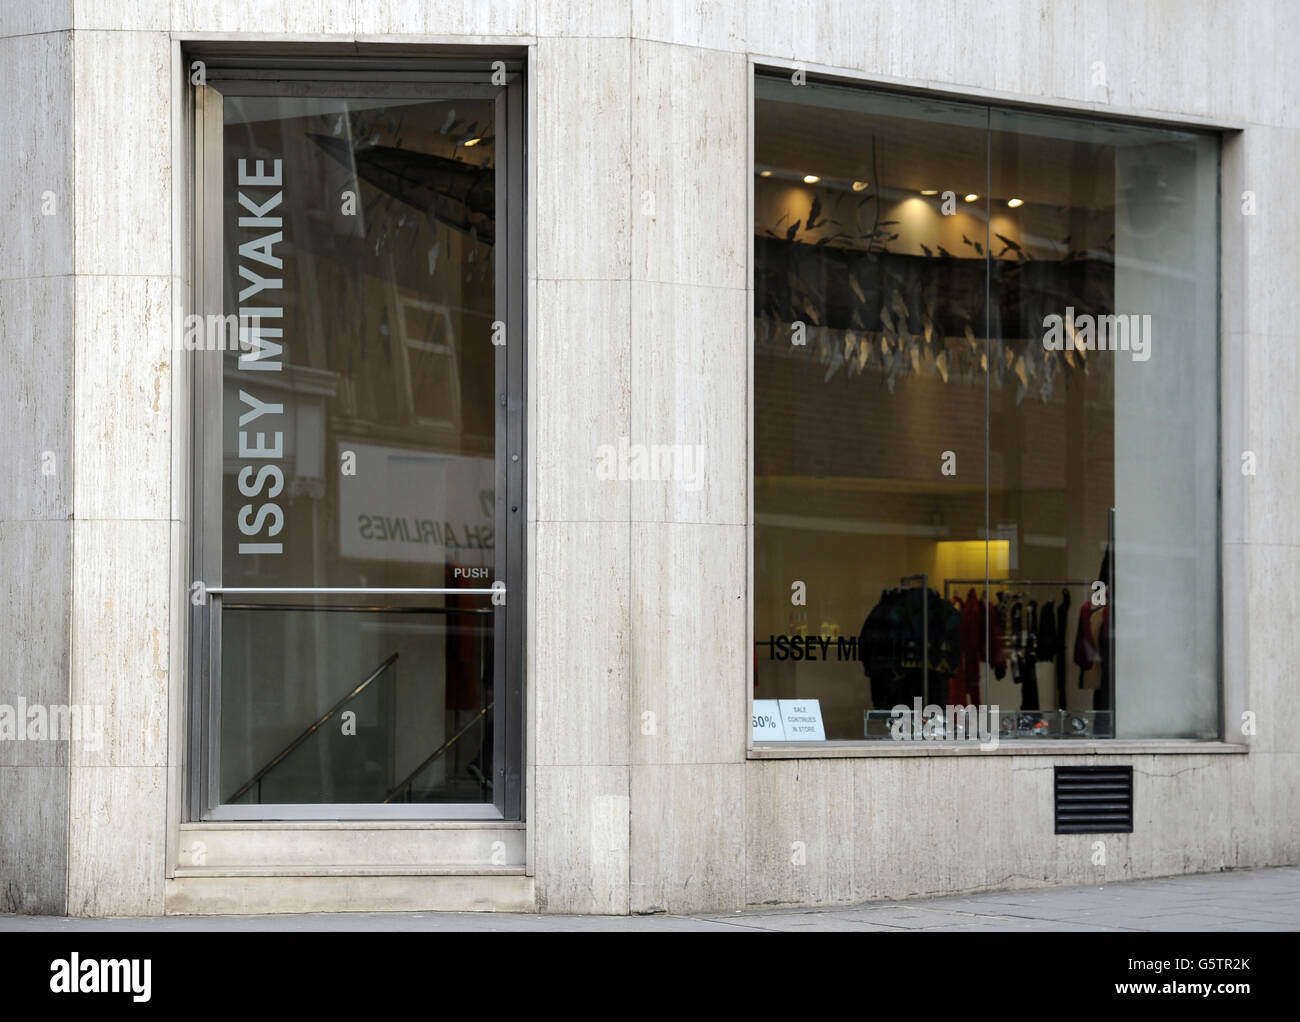 Stock image of the Issey Miyake shop in Conduit Street, London. Stock Photo